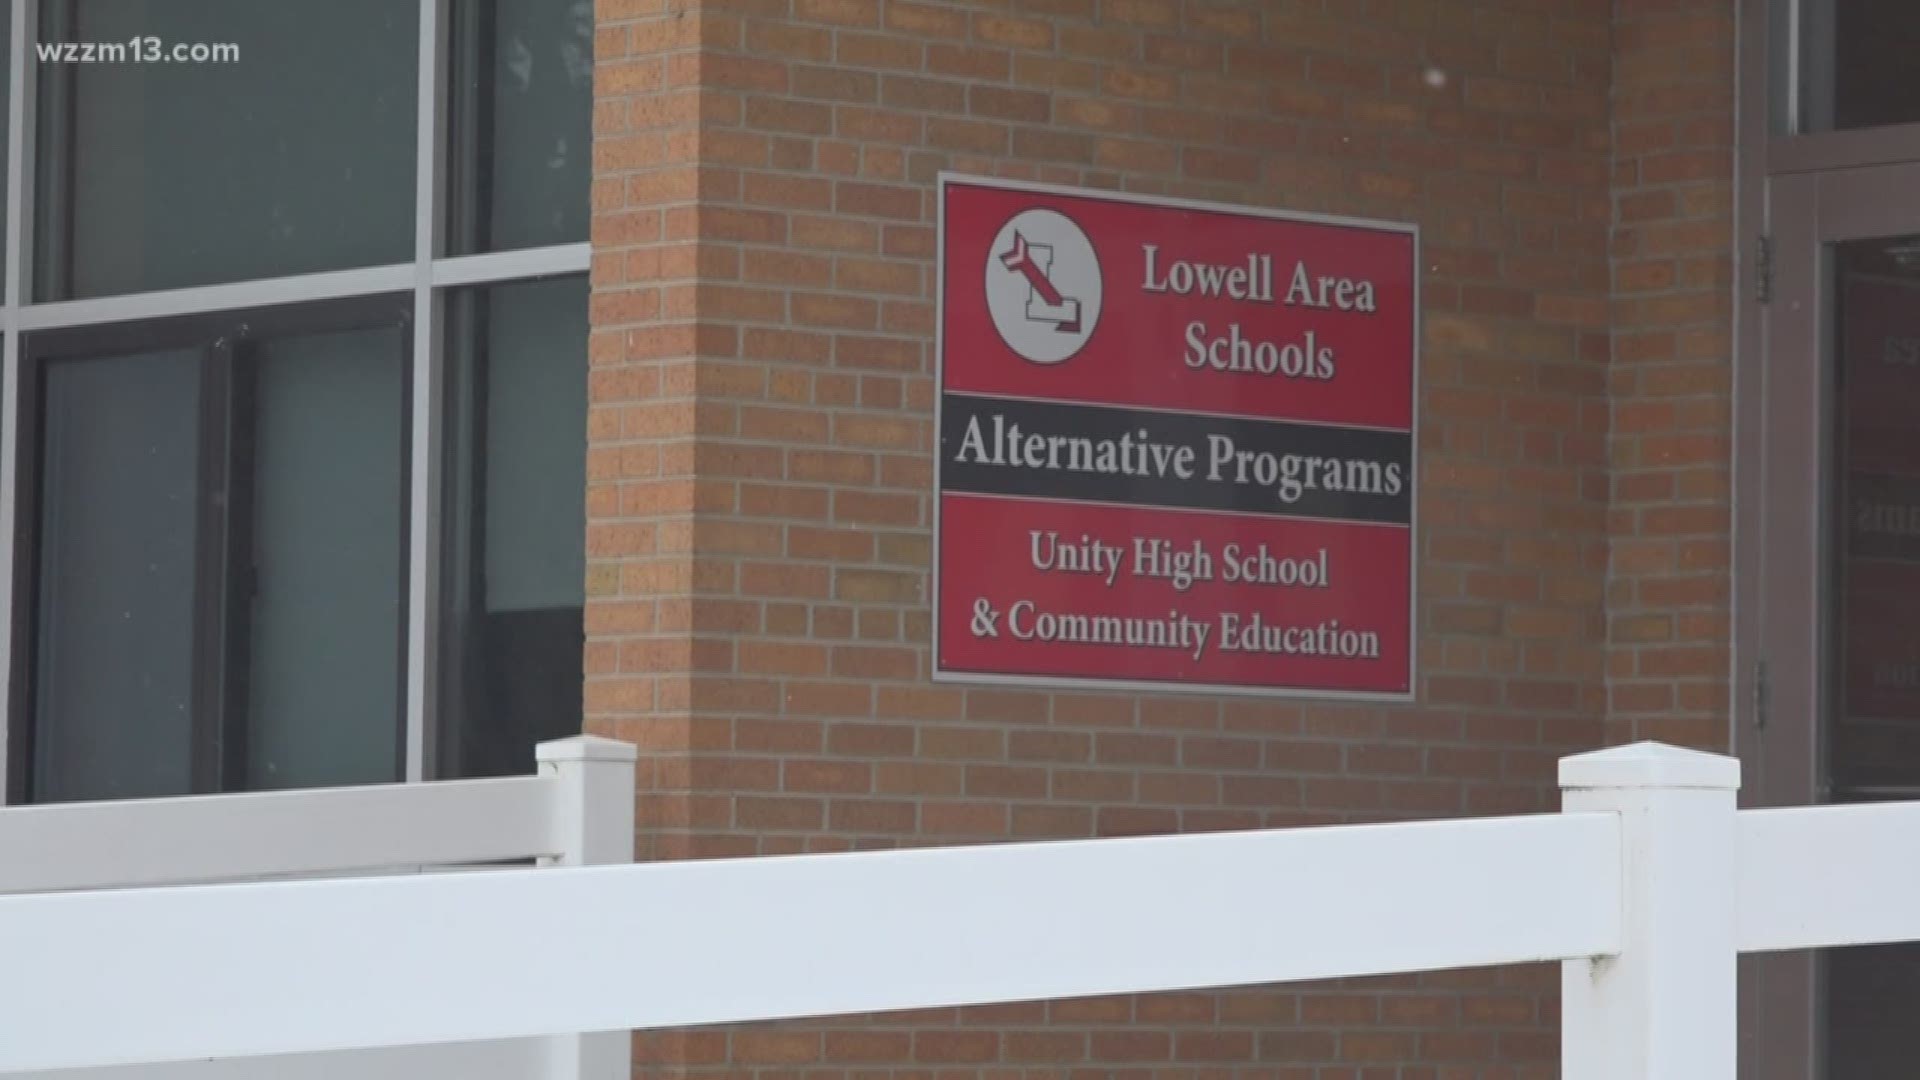 A Lowell High School student has tested positive for COVID-19, according to the district's superintendent.